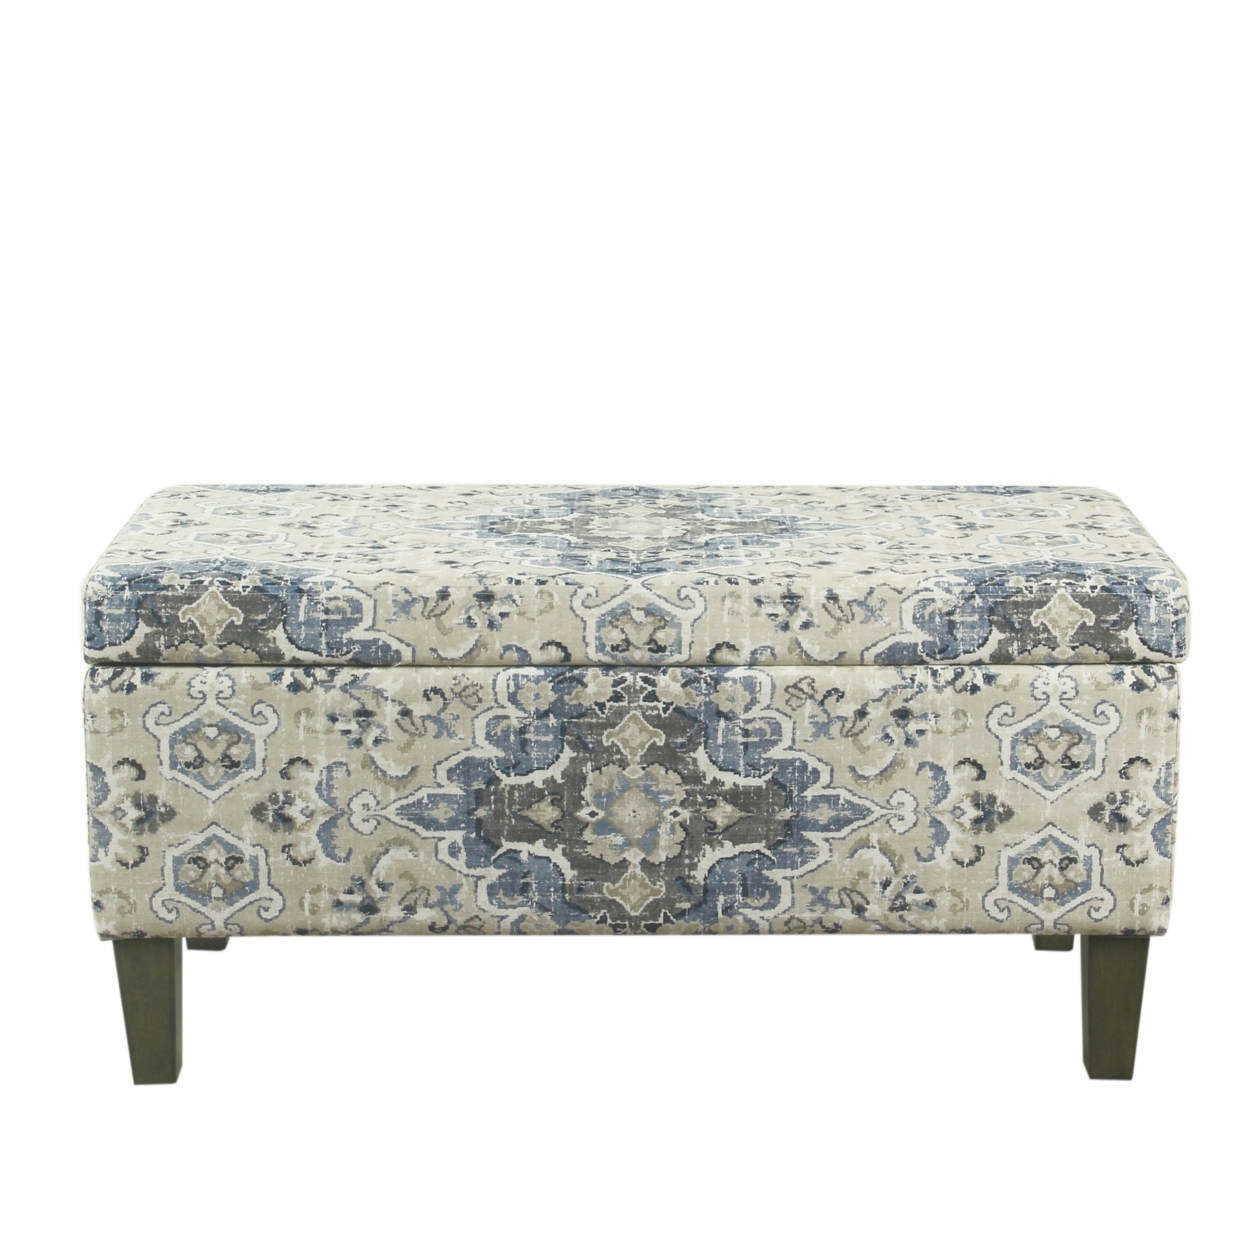 Medallion Print Fabric Upholstered Wooden Bench With Hinged Storage, Large, Blue And Cream- Saltoro Sherpi